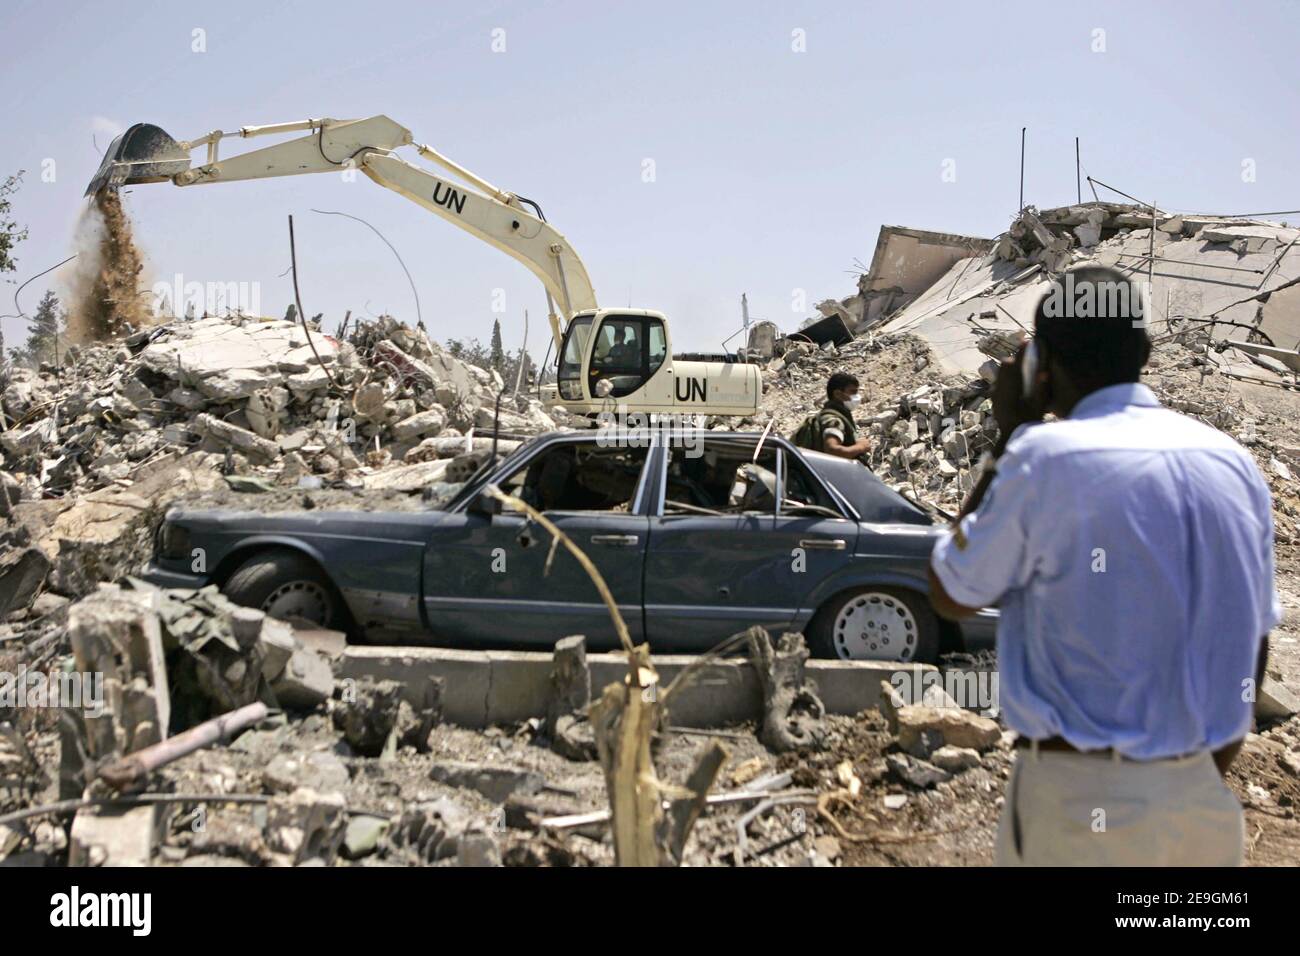 A United Nations employee observes the search for the bodies of a family in the rubble of a destroyed building that was bombed by Israeli warplanes last week in the outskirts of the southern coastal city of Tyre, Lebanon, on July 26, 2006. Photo by Michael Dorhn/ABACAPRESS.COM Stock Photo